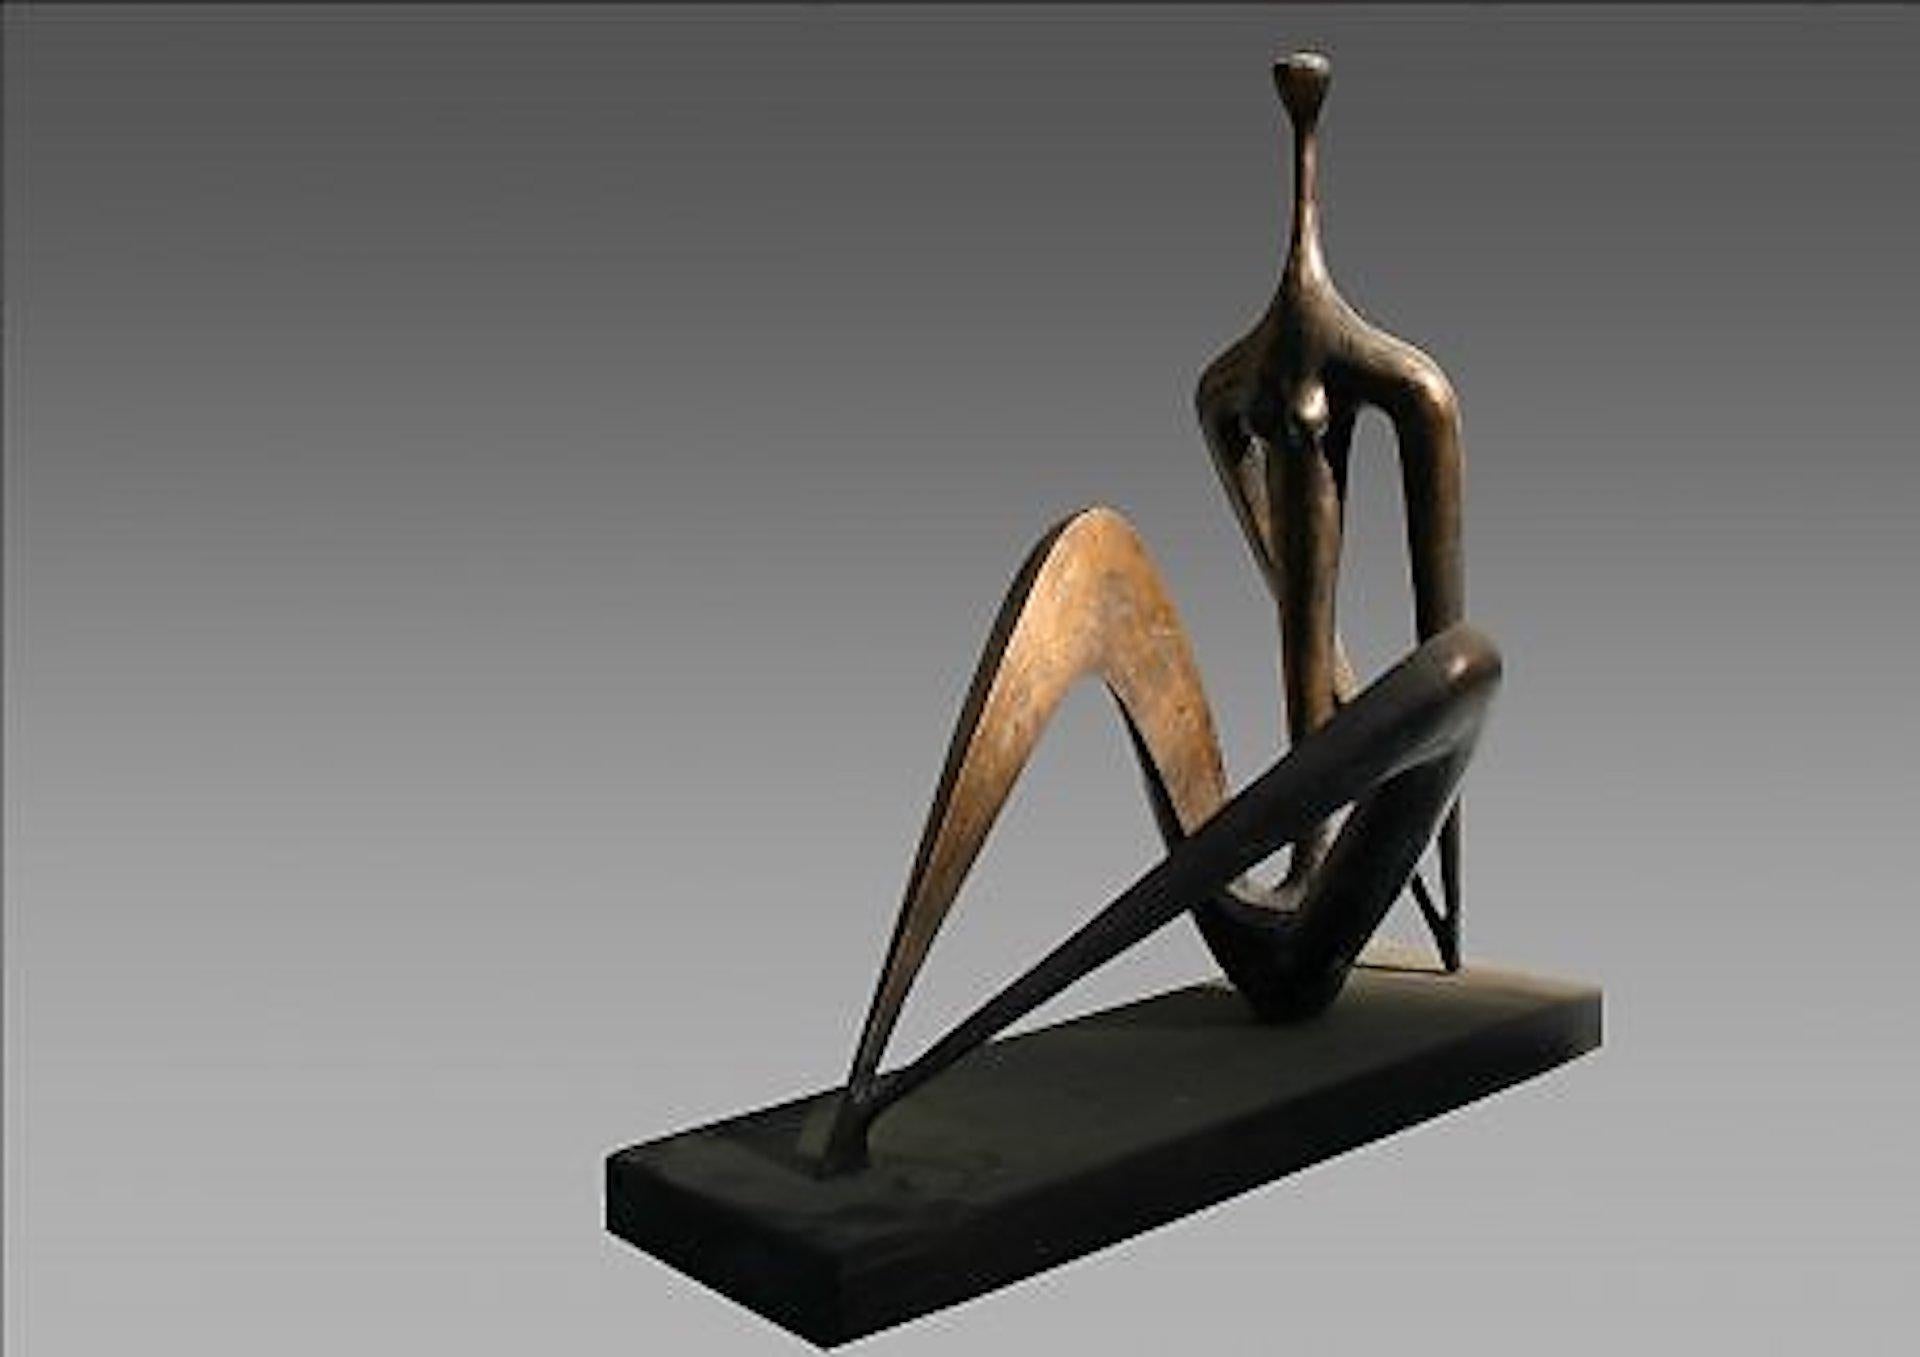 Bronze & wood sculpture 

Rezo Khasia is a Georgian artist born in 1947 who lives and works in Tbilisi, Georgia. The sculptures performed by him are generalized and minimalist. He Uses as a working material the bronze, wood, stone, metal and general